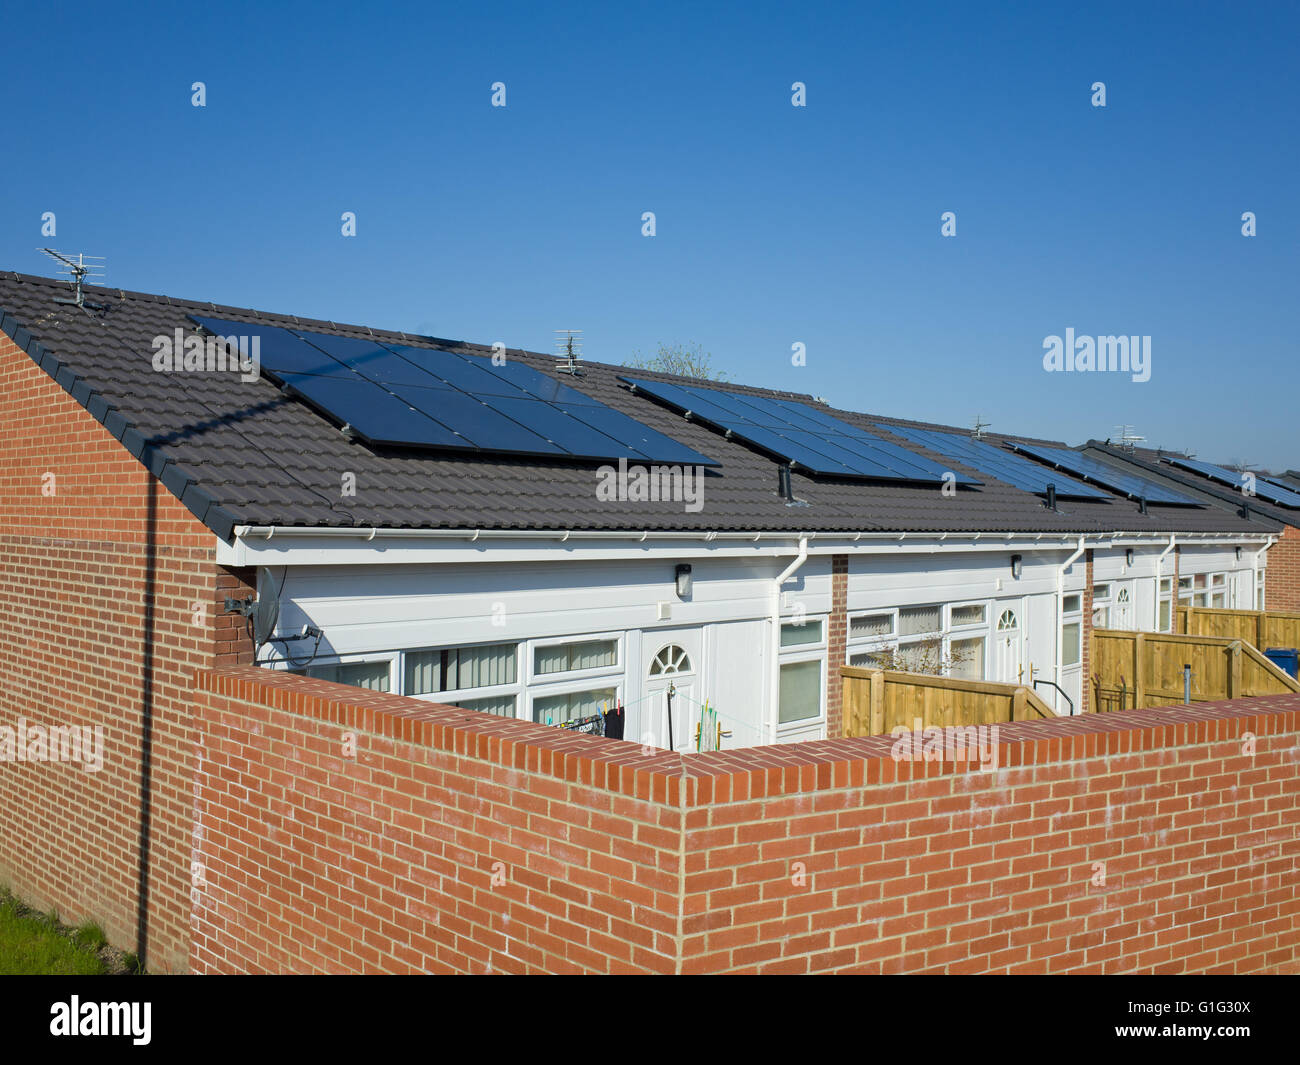 Bungalow with Solar panels Stock Photo